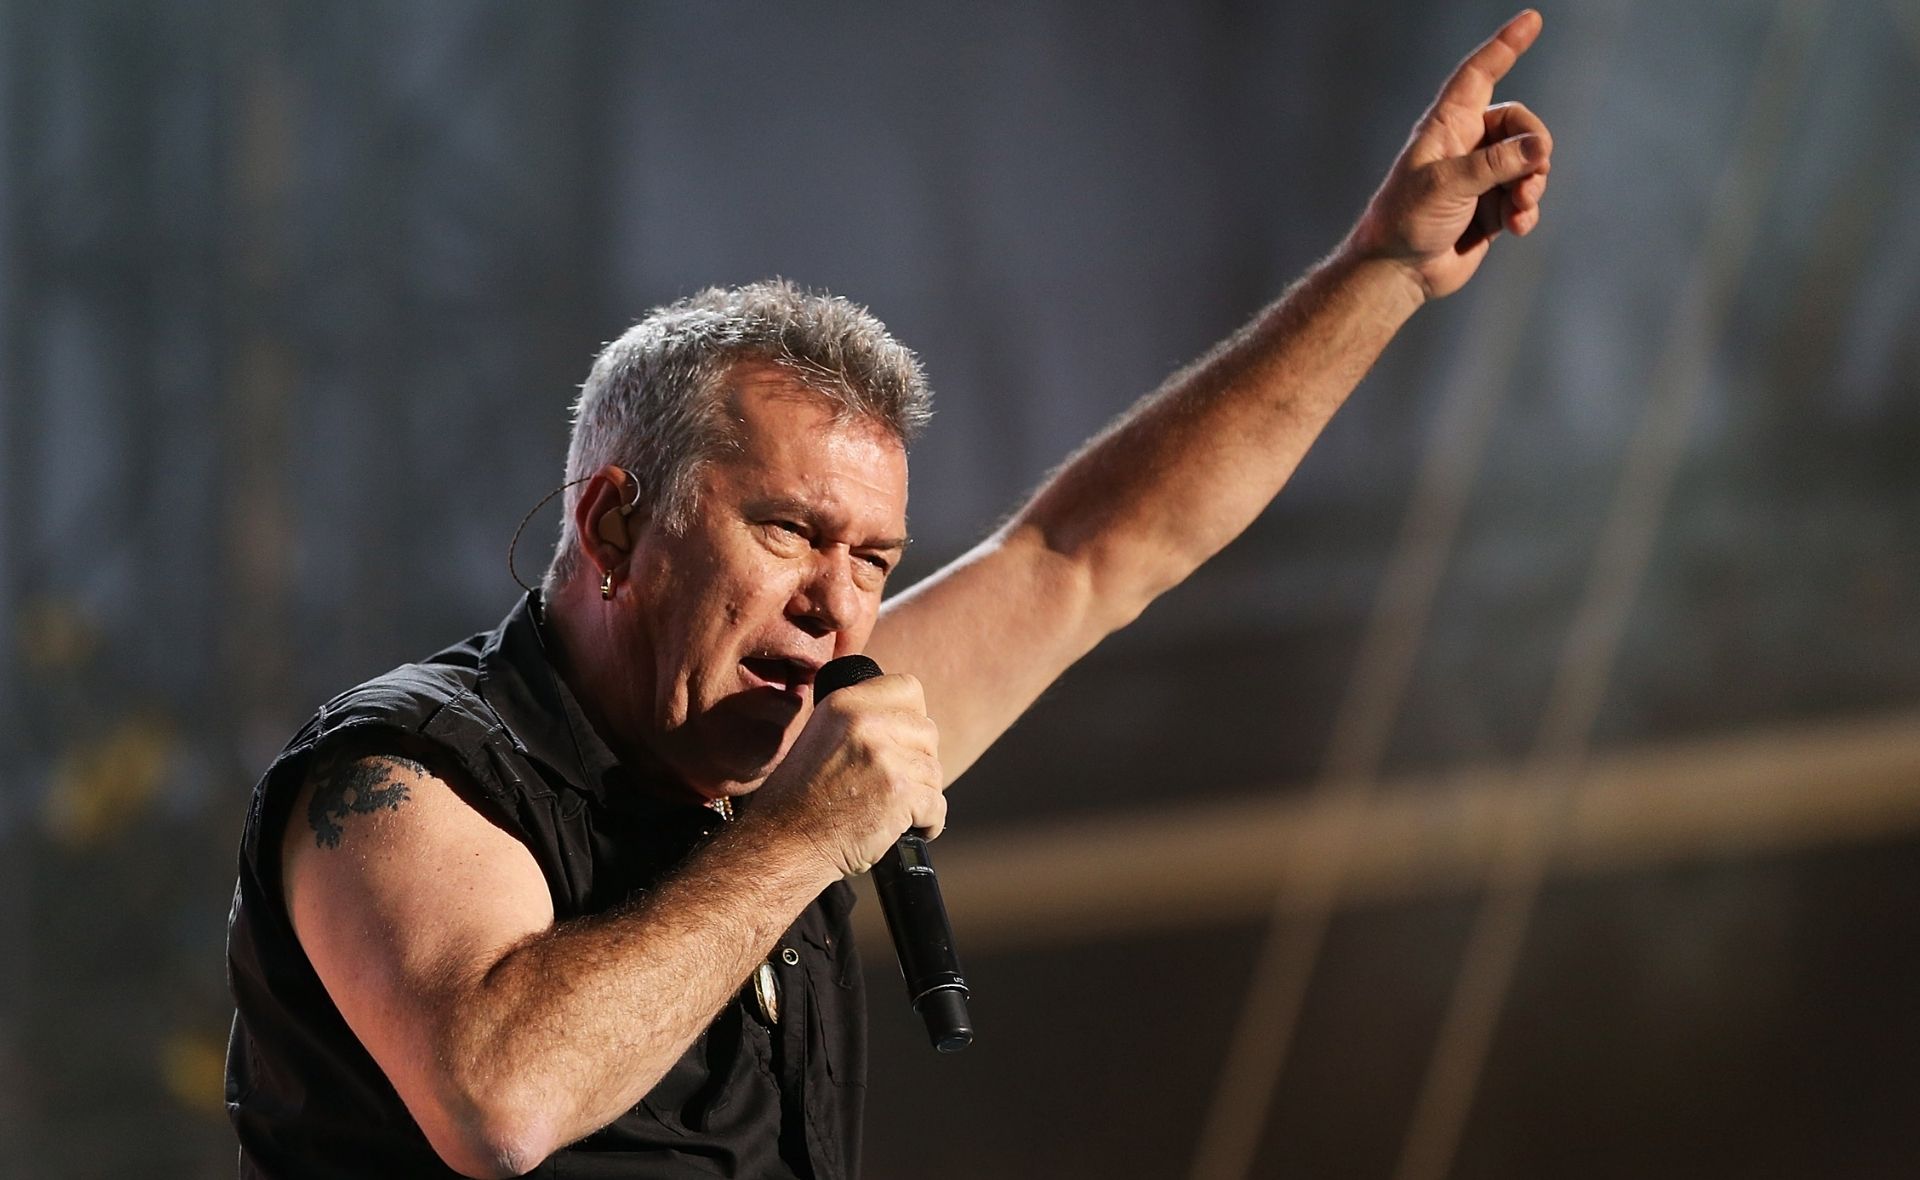 This epic throwback of Jimmy Barnes proves the working class man was a total “smoke show” when he was young